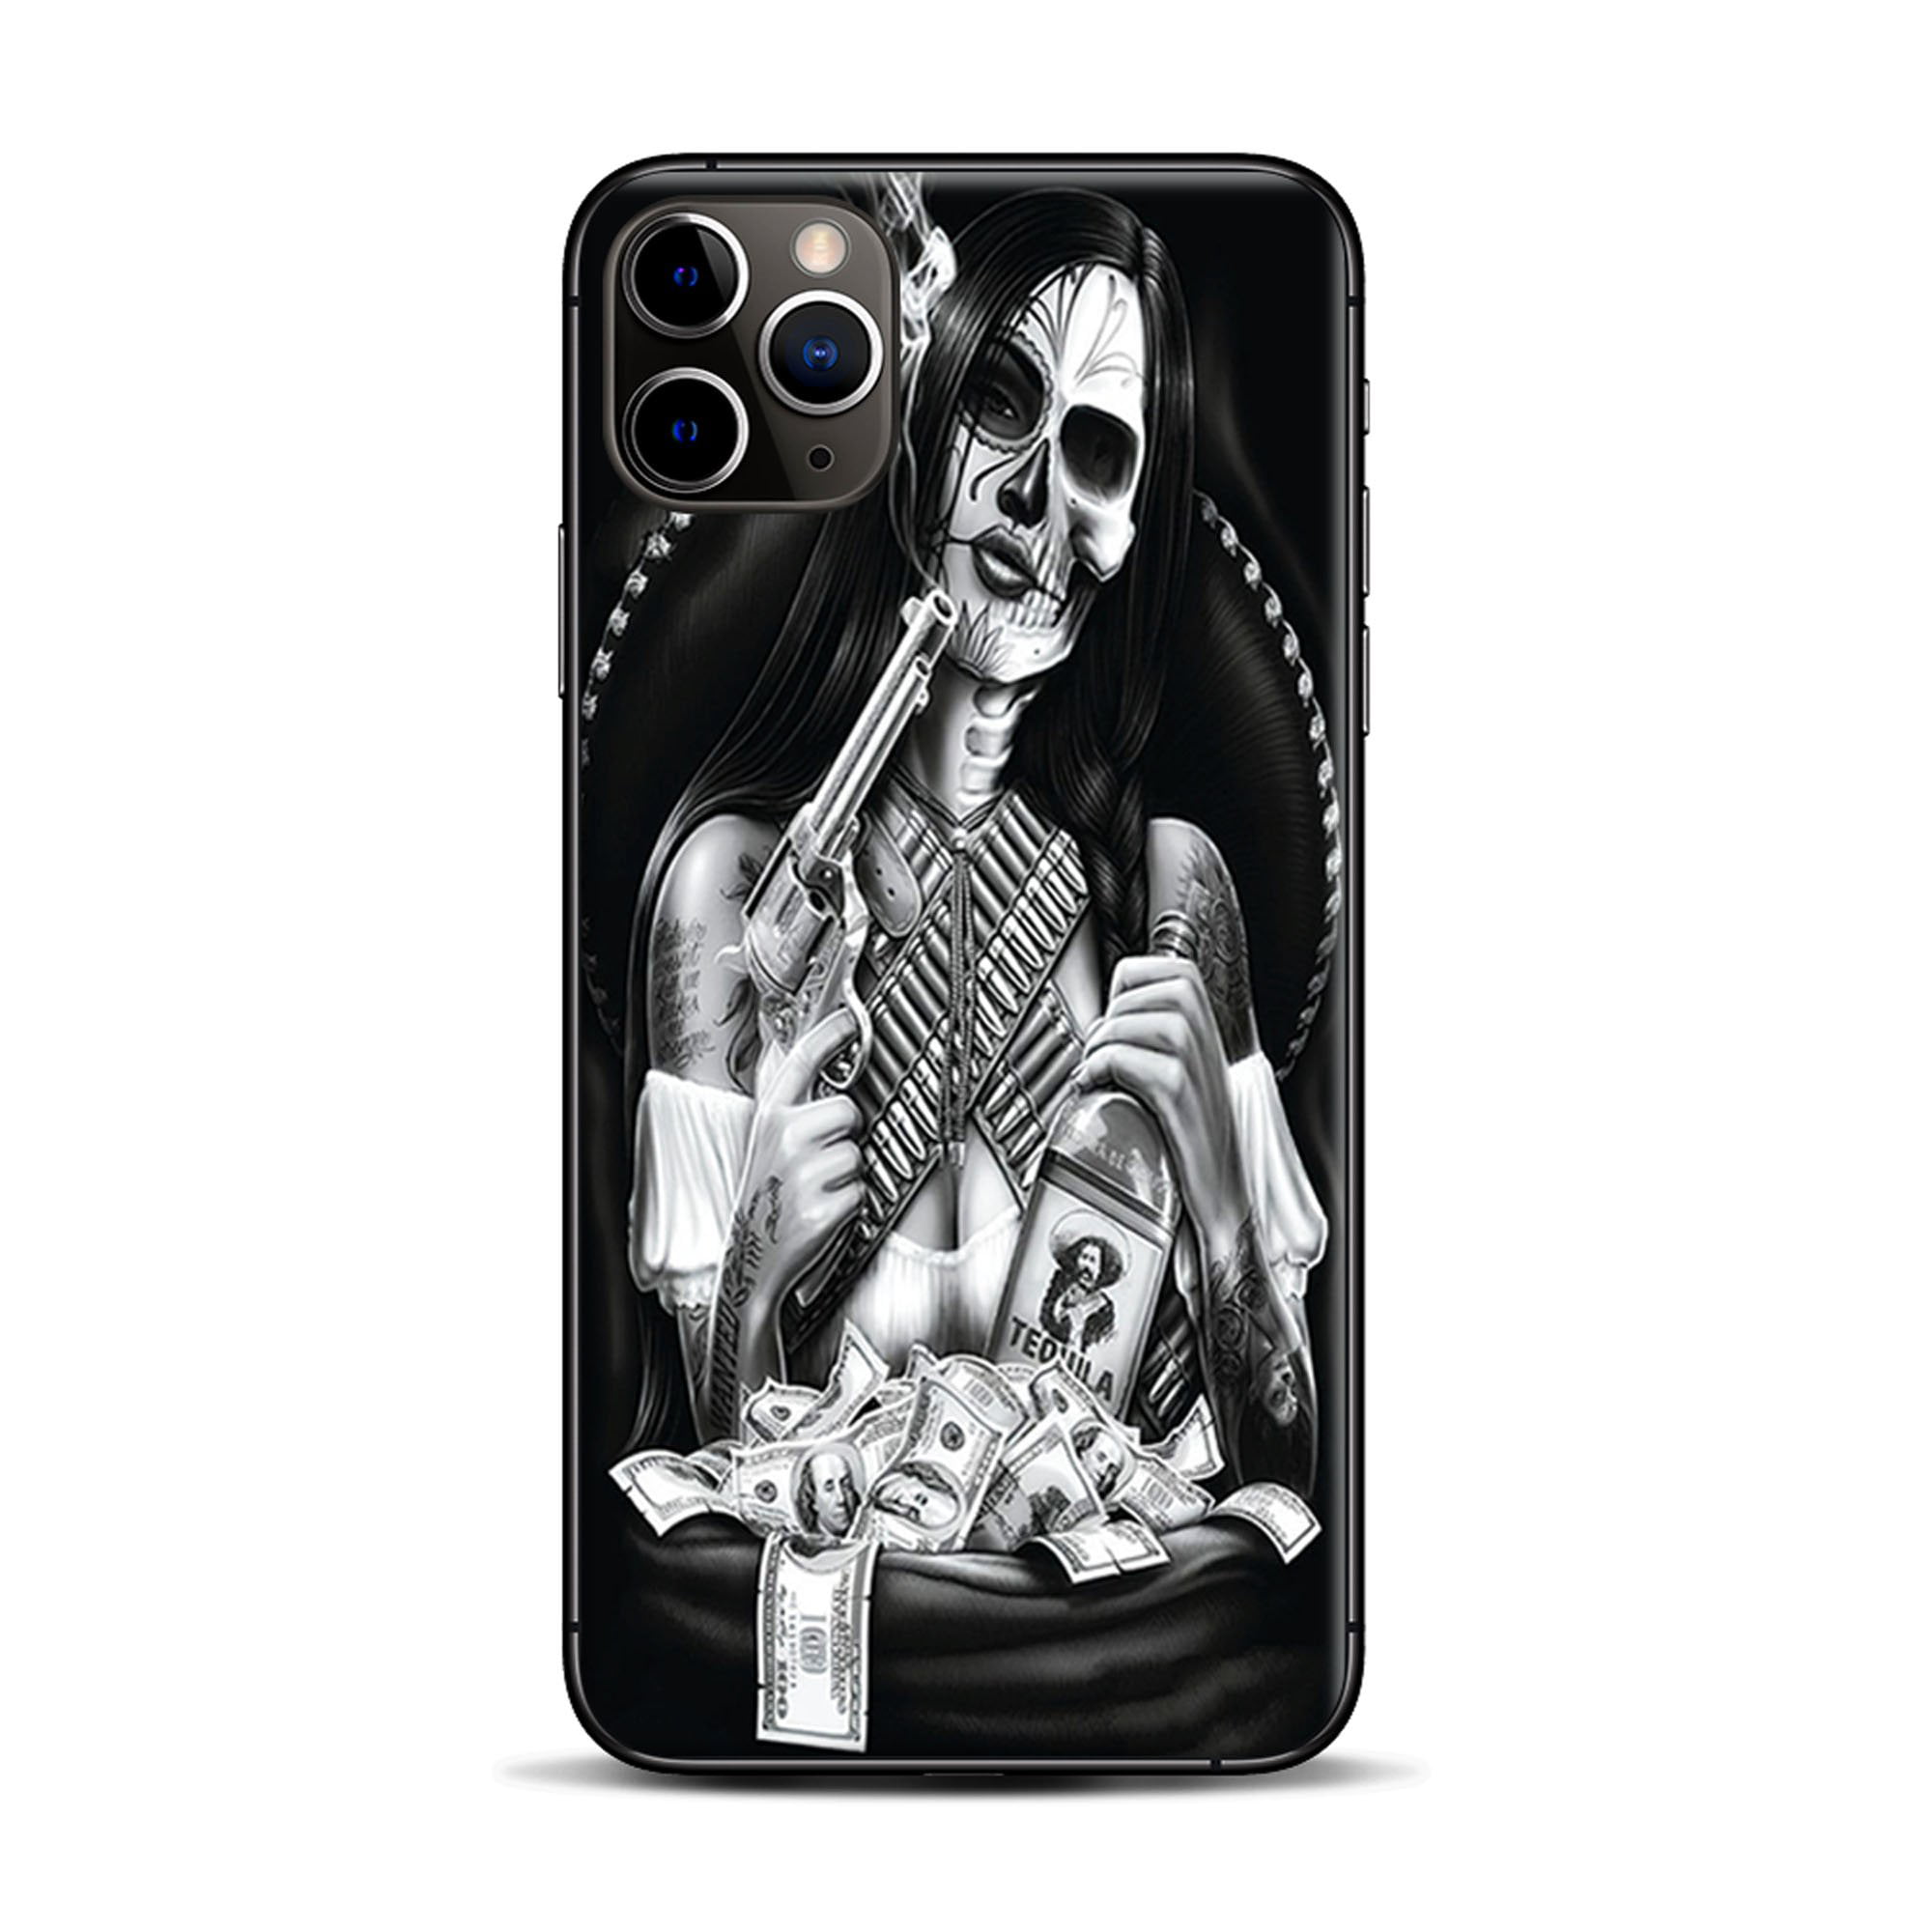 Skin Decal Vinyl Wrap for  Fire HD 8 Tablet 8 inch stickers skins cover/ Skull girl Gangster Day of the Dead 